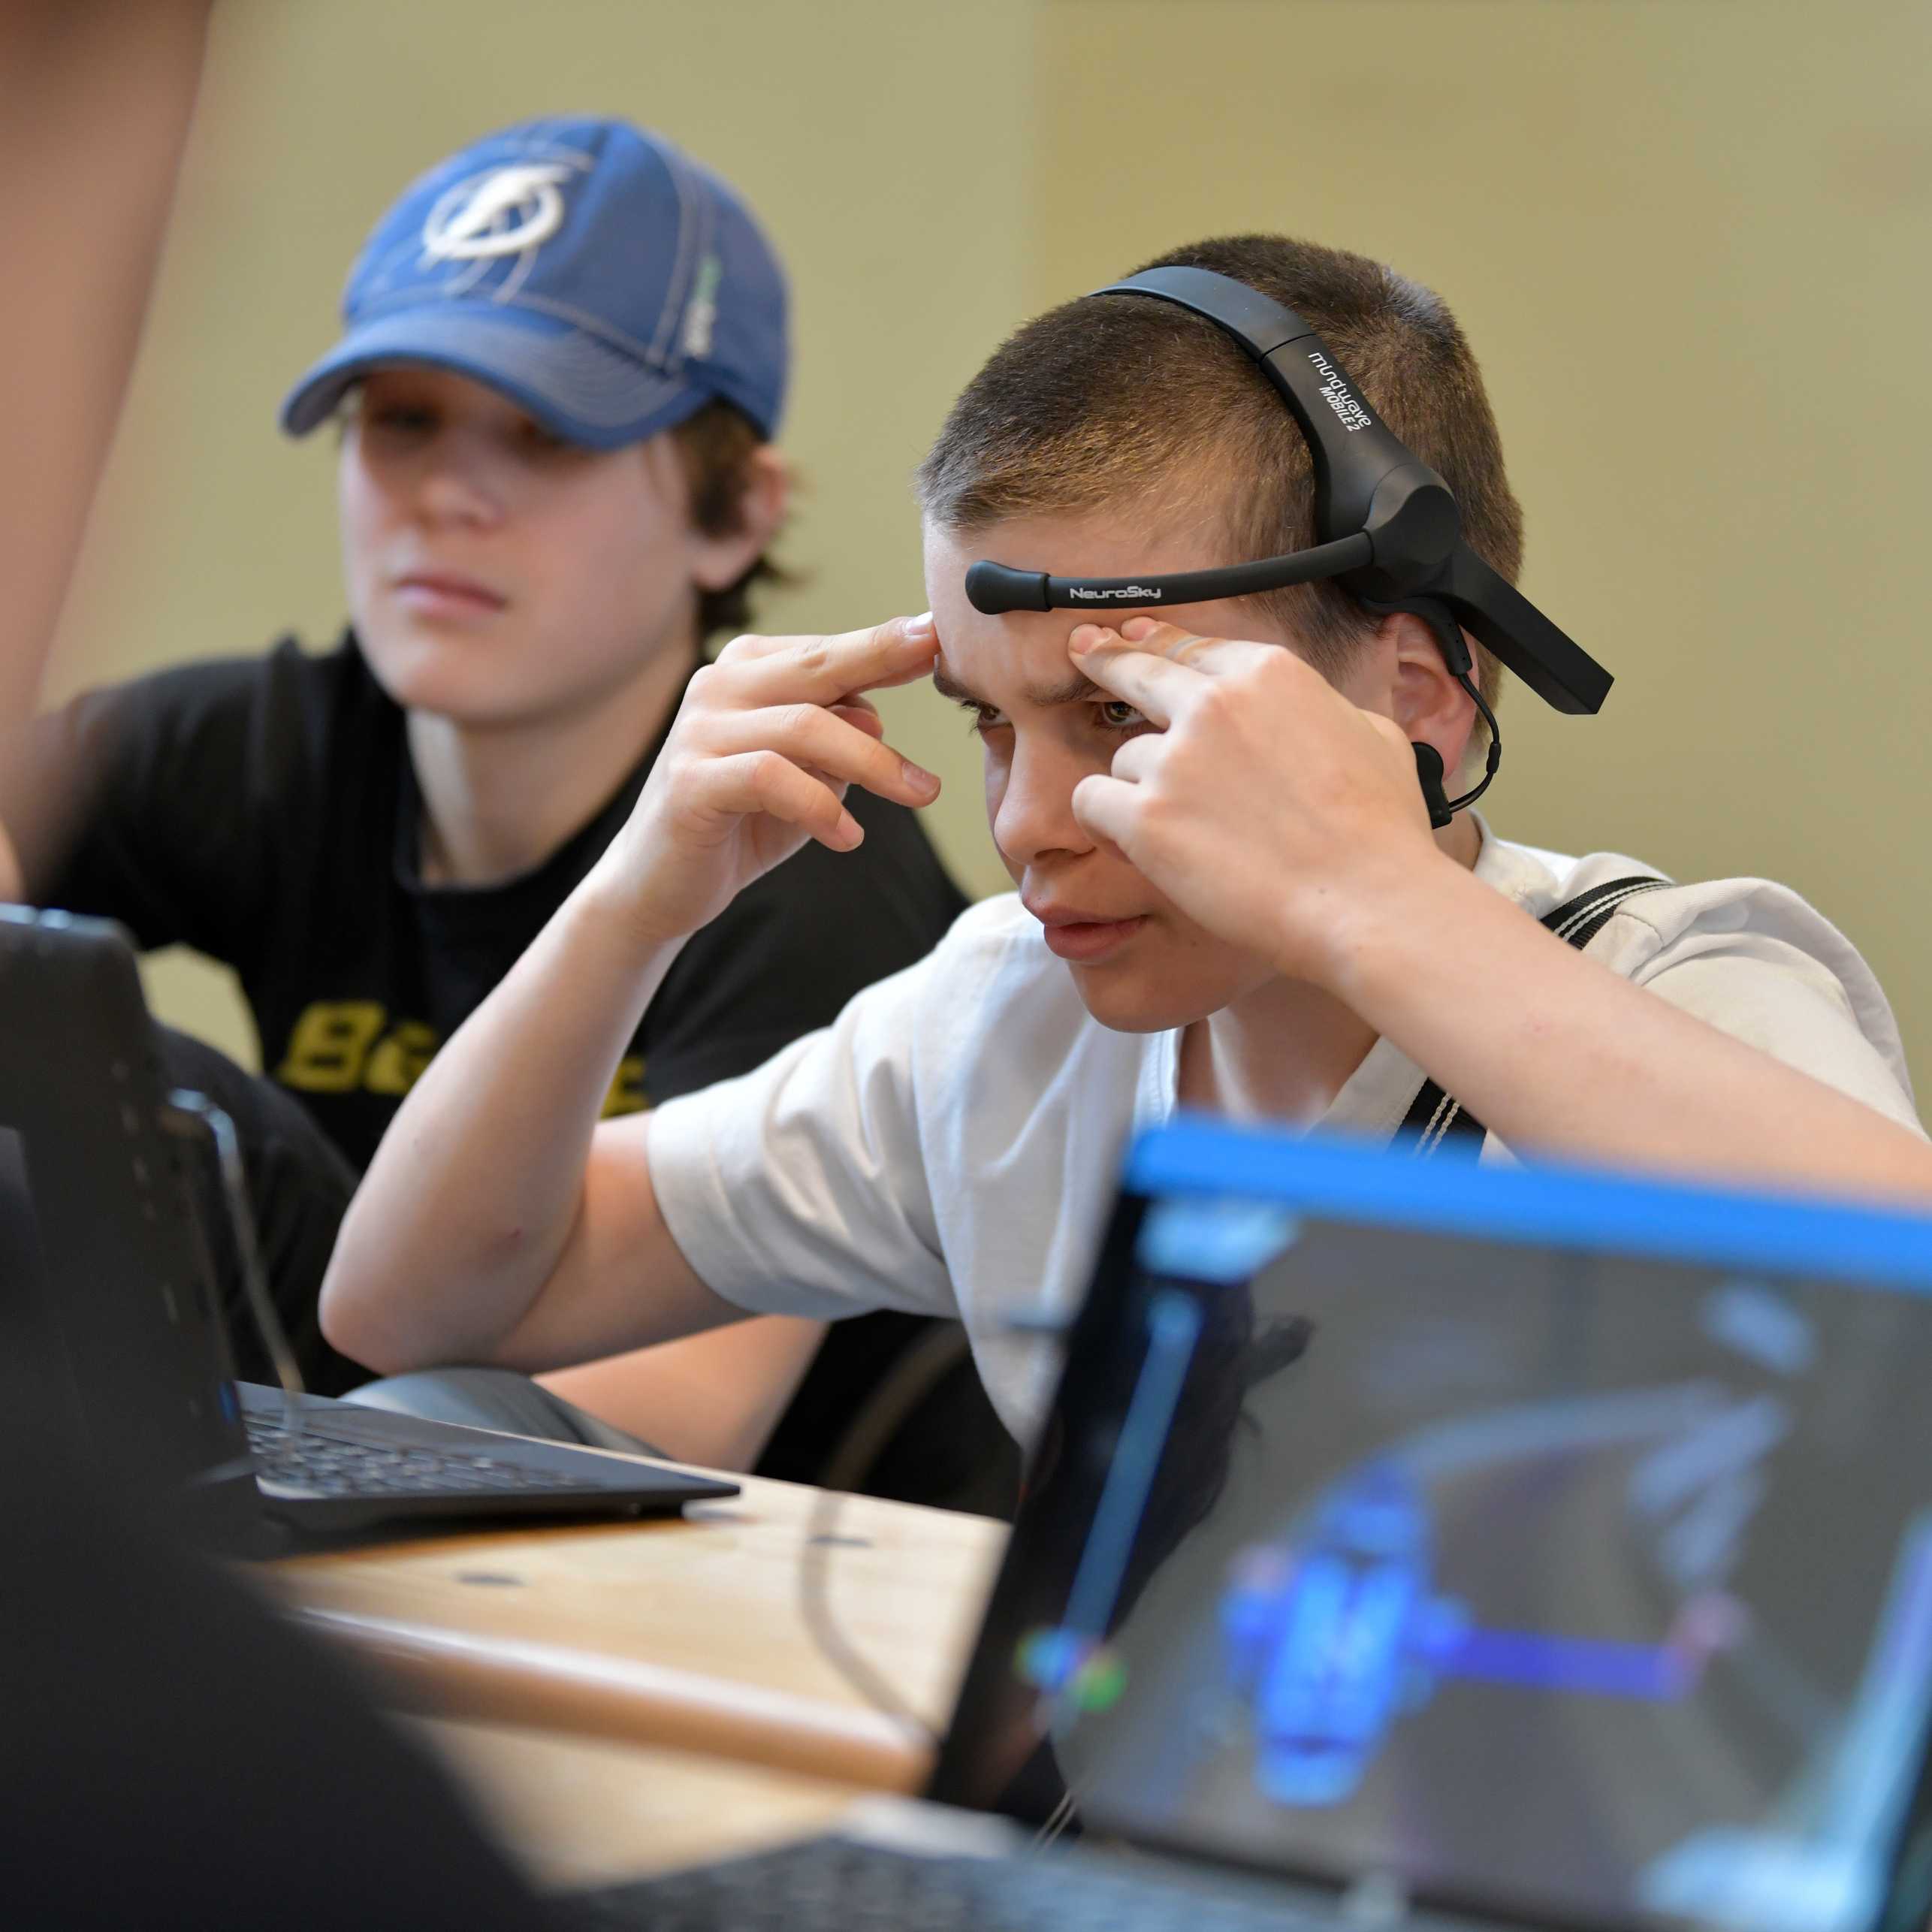 Scholar concentrating, wearing a Brain Comuter Interface (BCI) headset